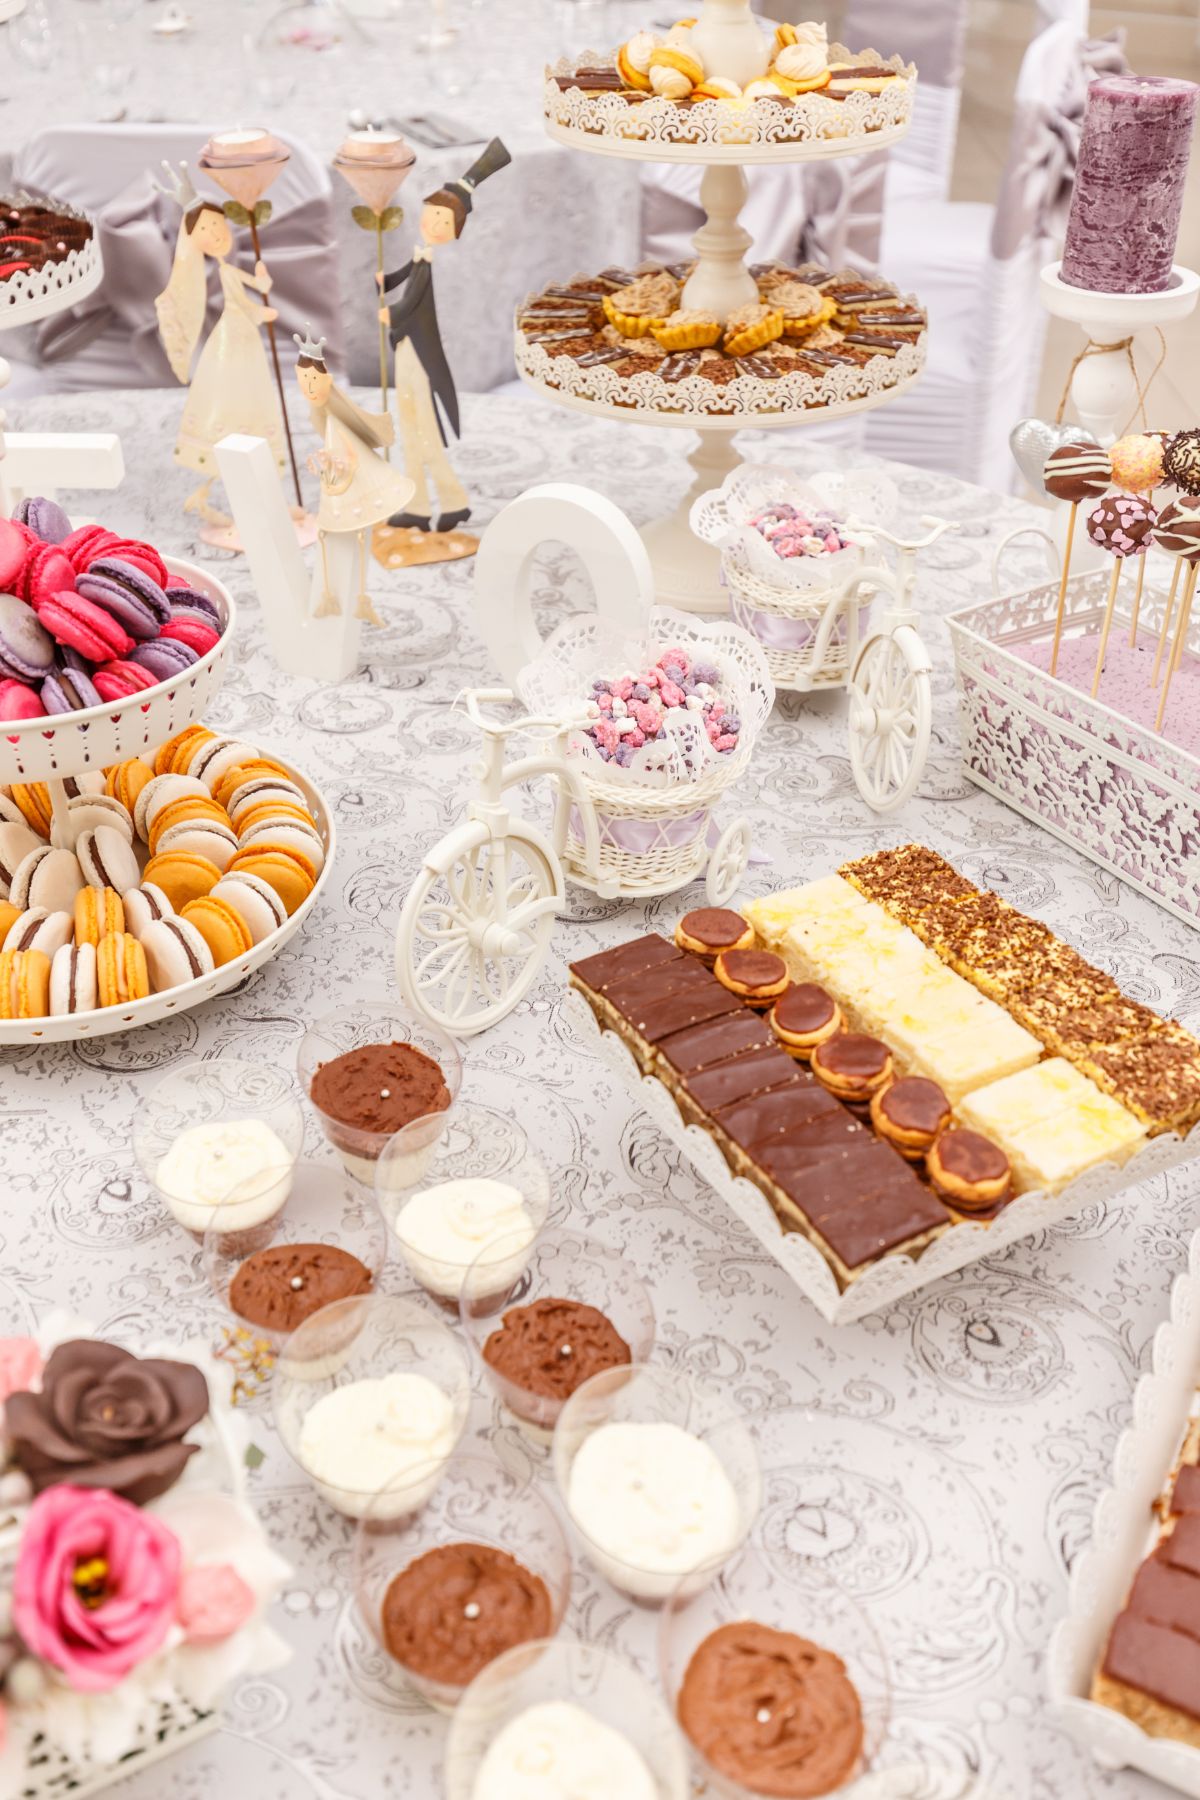 How To Create A Dessert Table